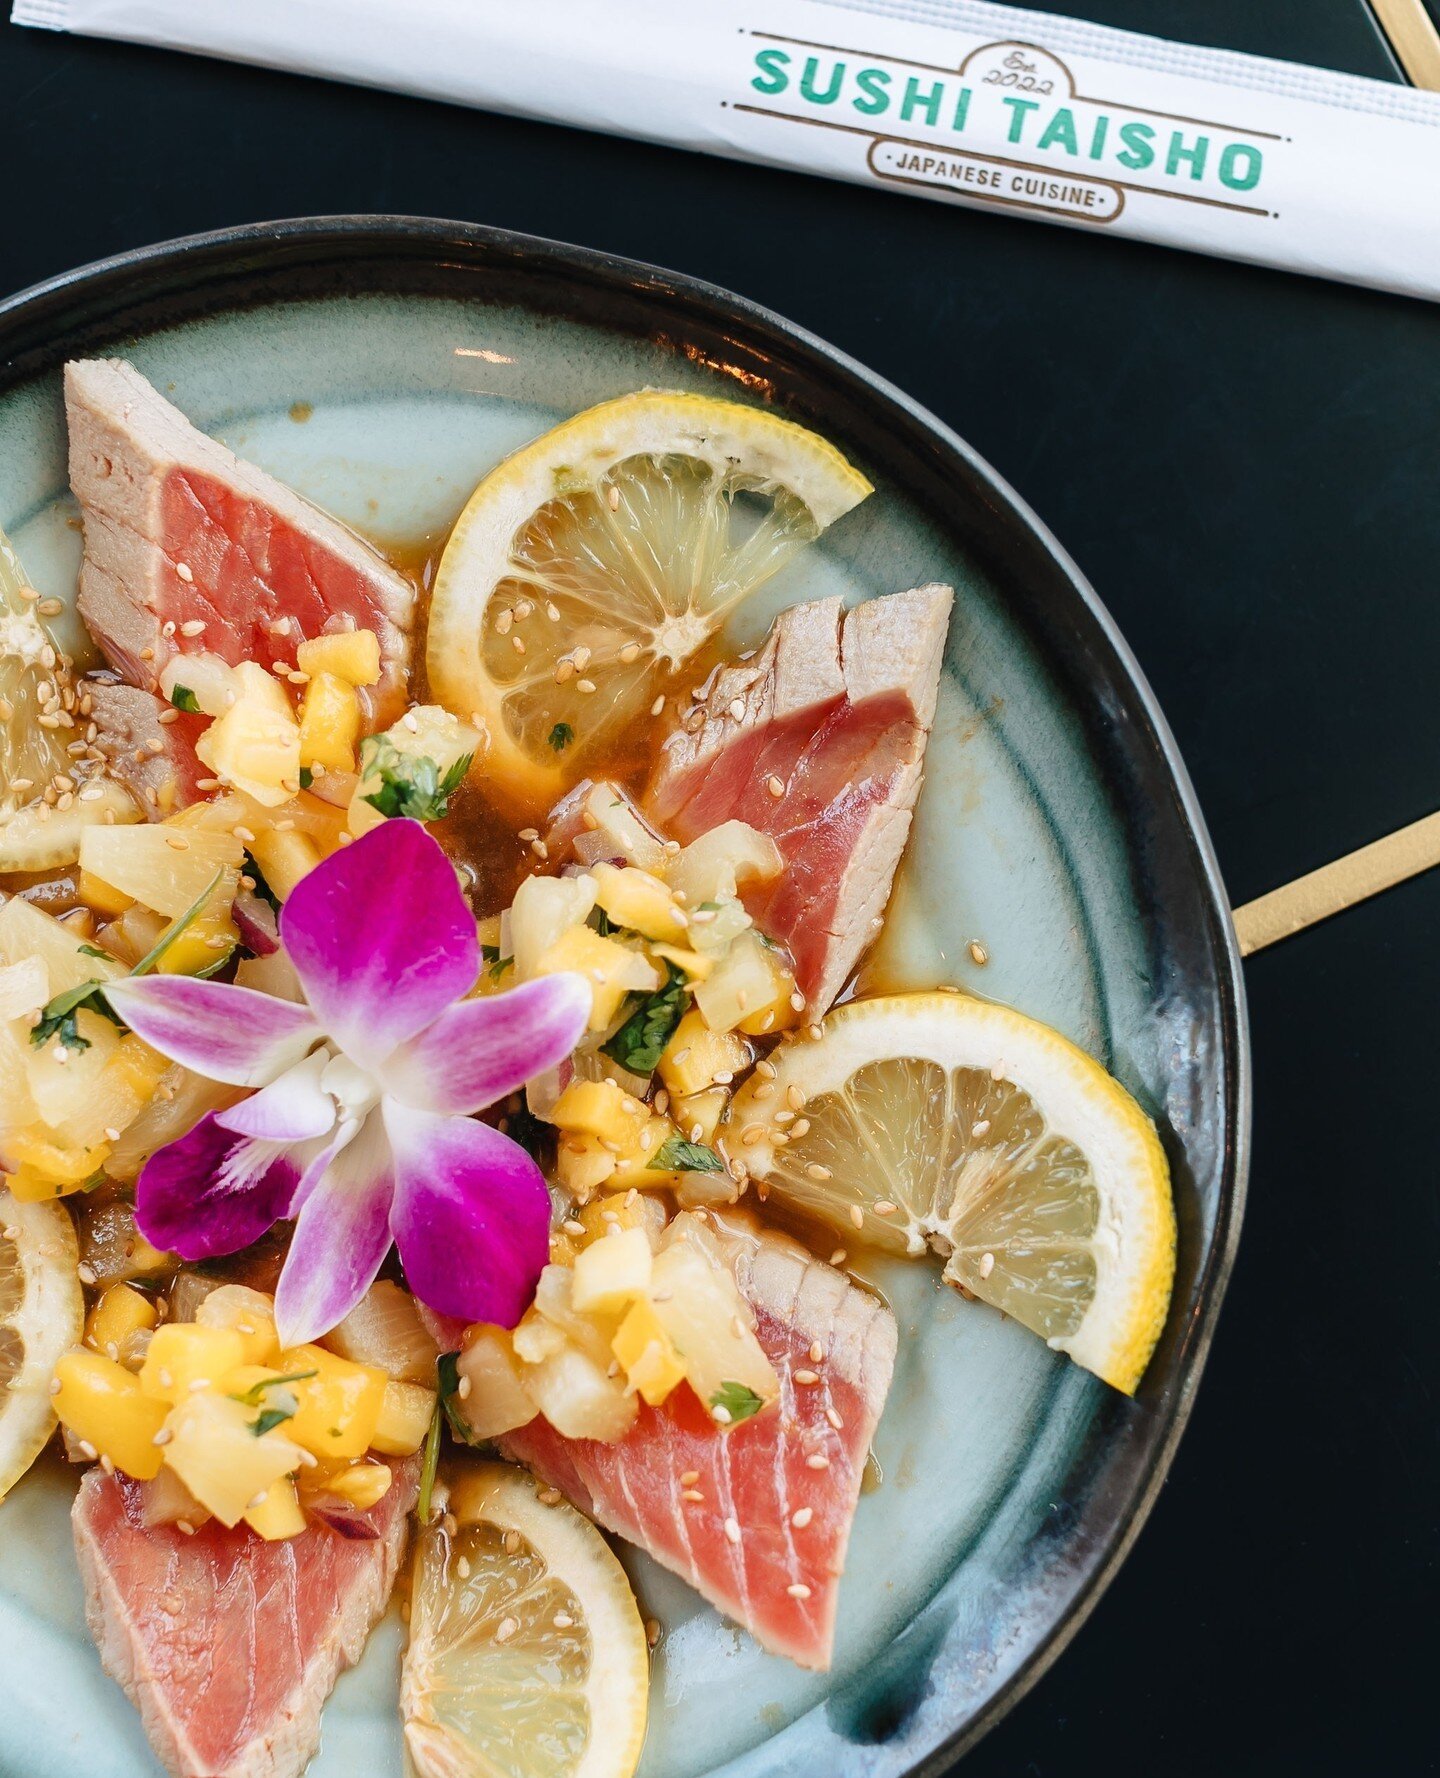 Seared summery perfection ☀️ Enjoy this delicious tuna carpaccio with a side of sunshine on our gorgeous outdoor patio!!! Only at Sushi Taisho 🥢🌟⁠
⁠
Seared Tropical Sunset Carpaccio: 6 pieces of seared tuna topped with mango, pineapple, jalapeno, a